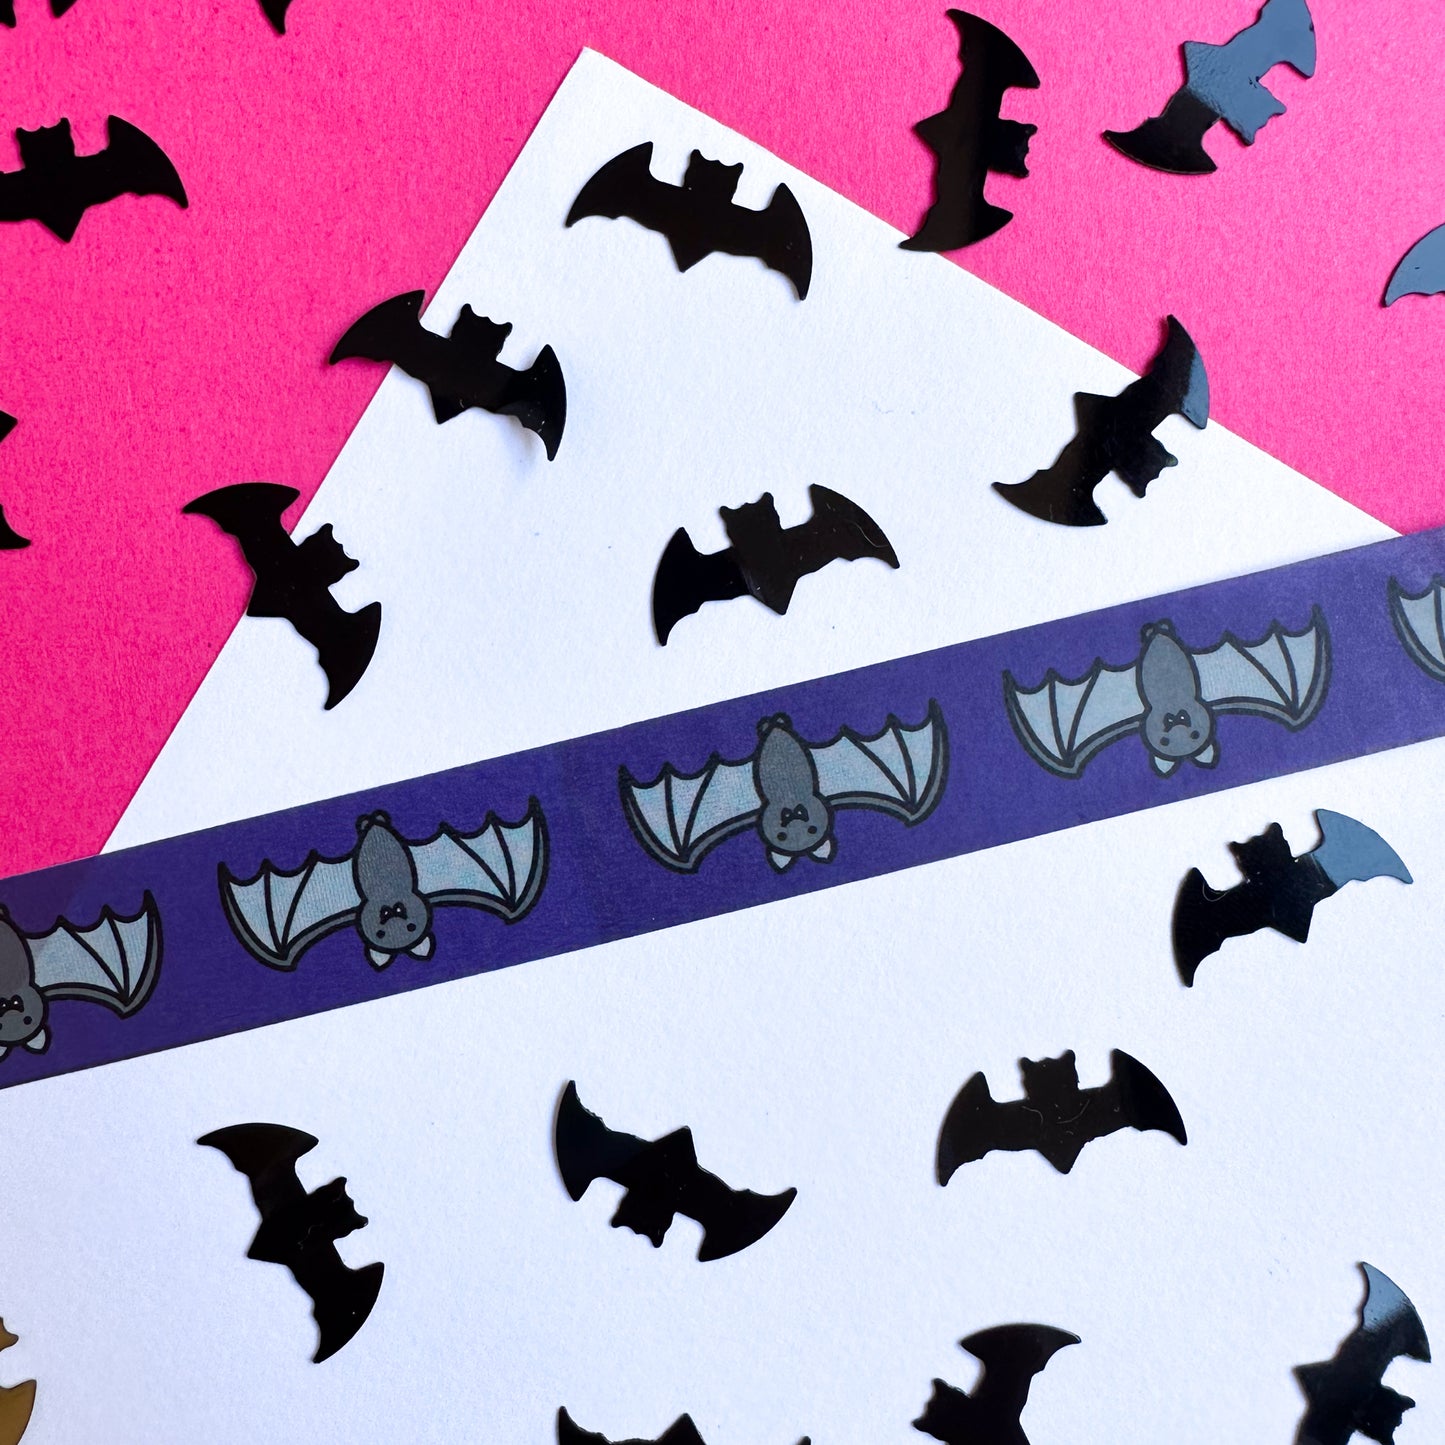 A piece of washi tape stuck to a white piece of paper on a hot pink piece of paper. The tape is dark purple with illustrations of cute bats on it. There is black bat confetti strewn around the tape.